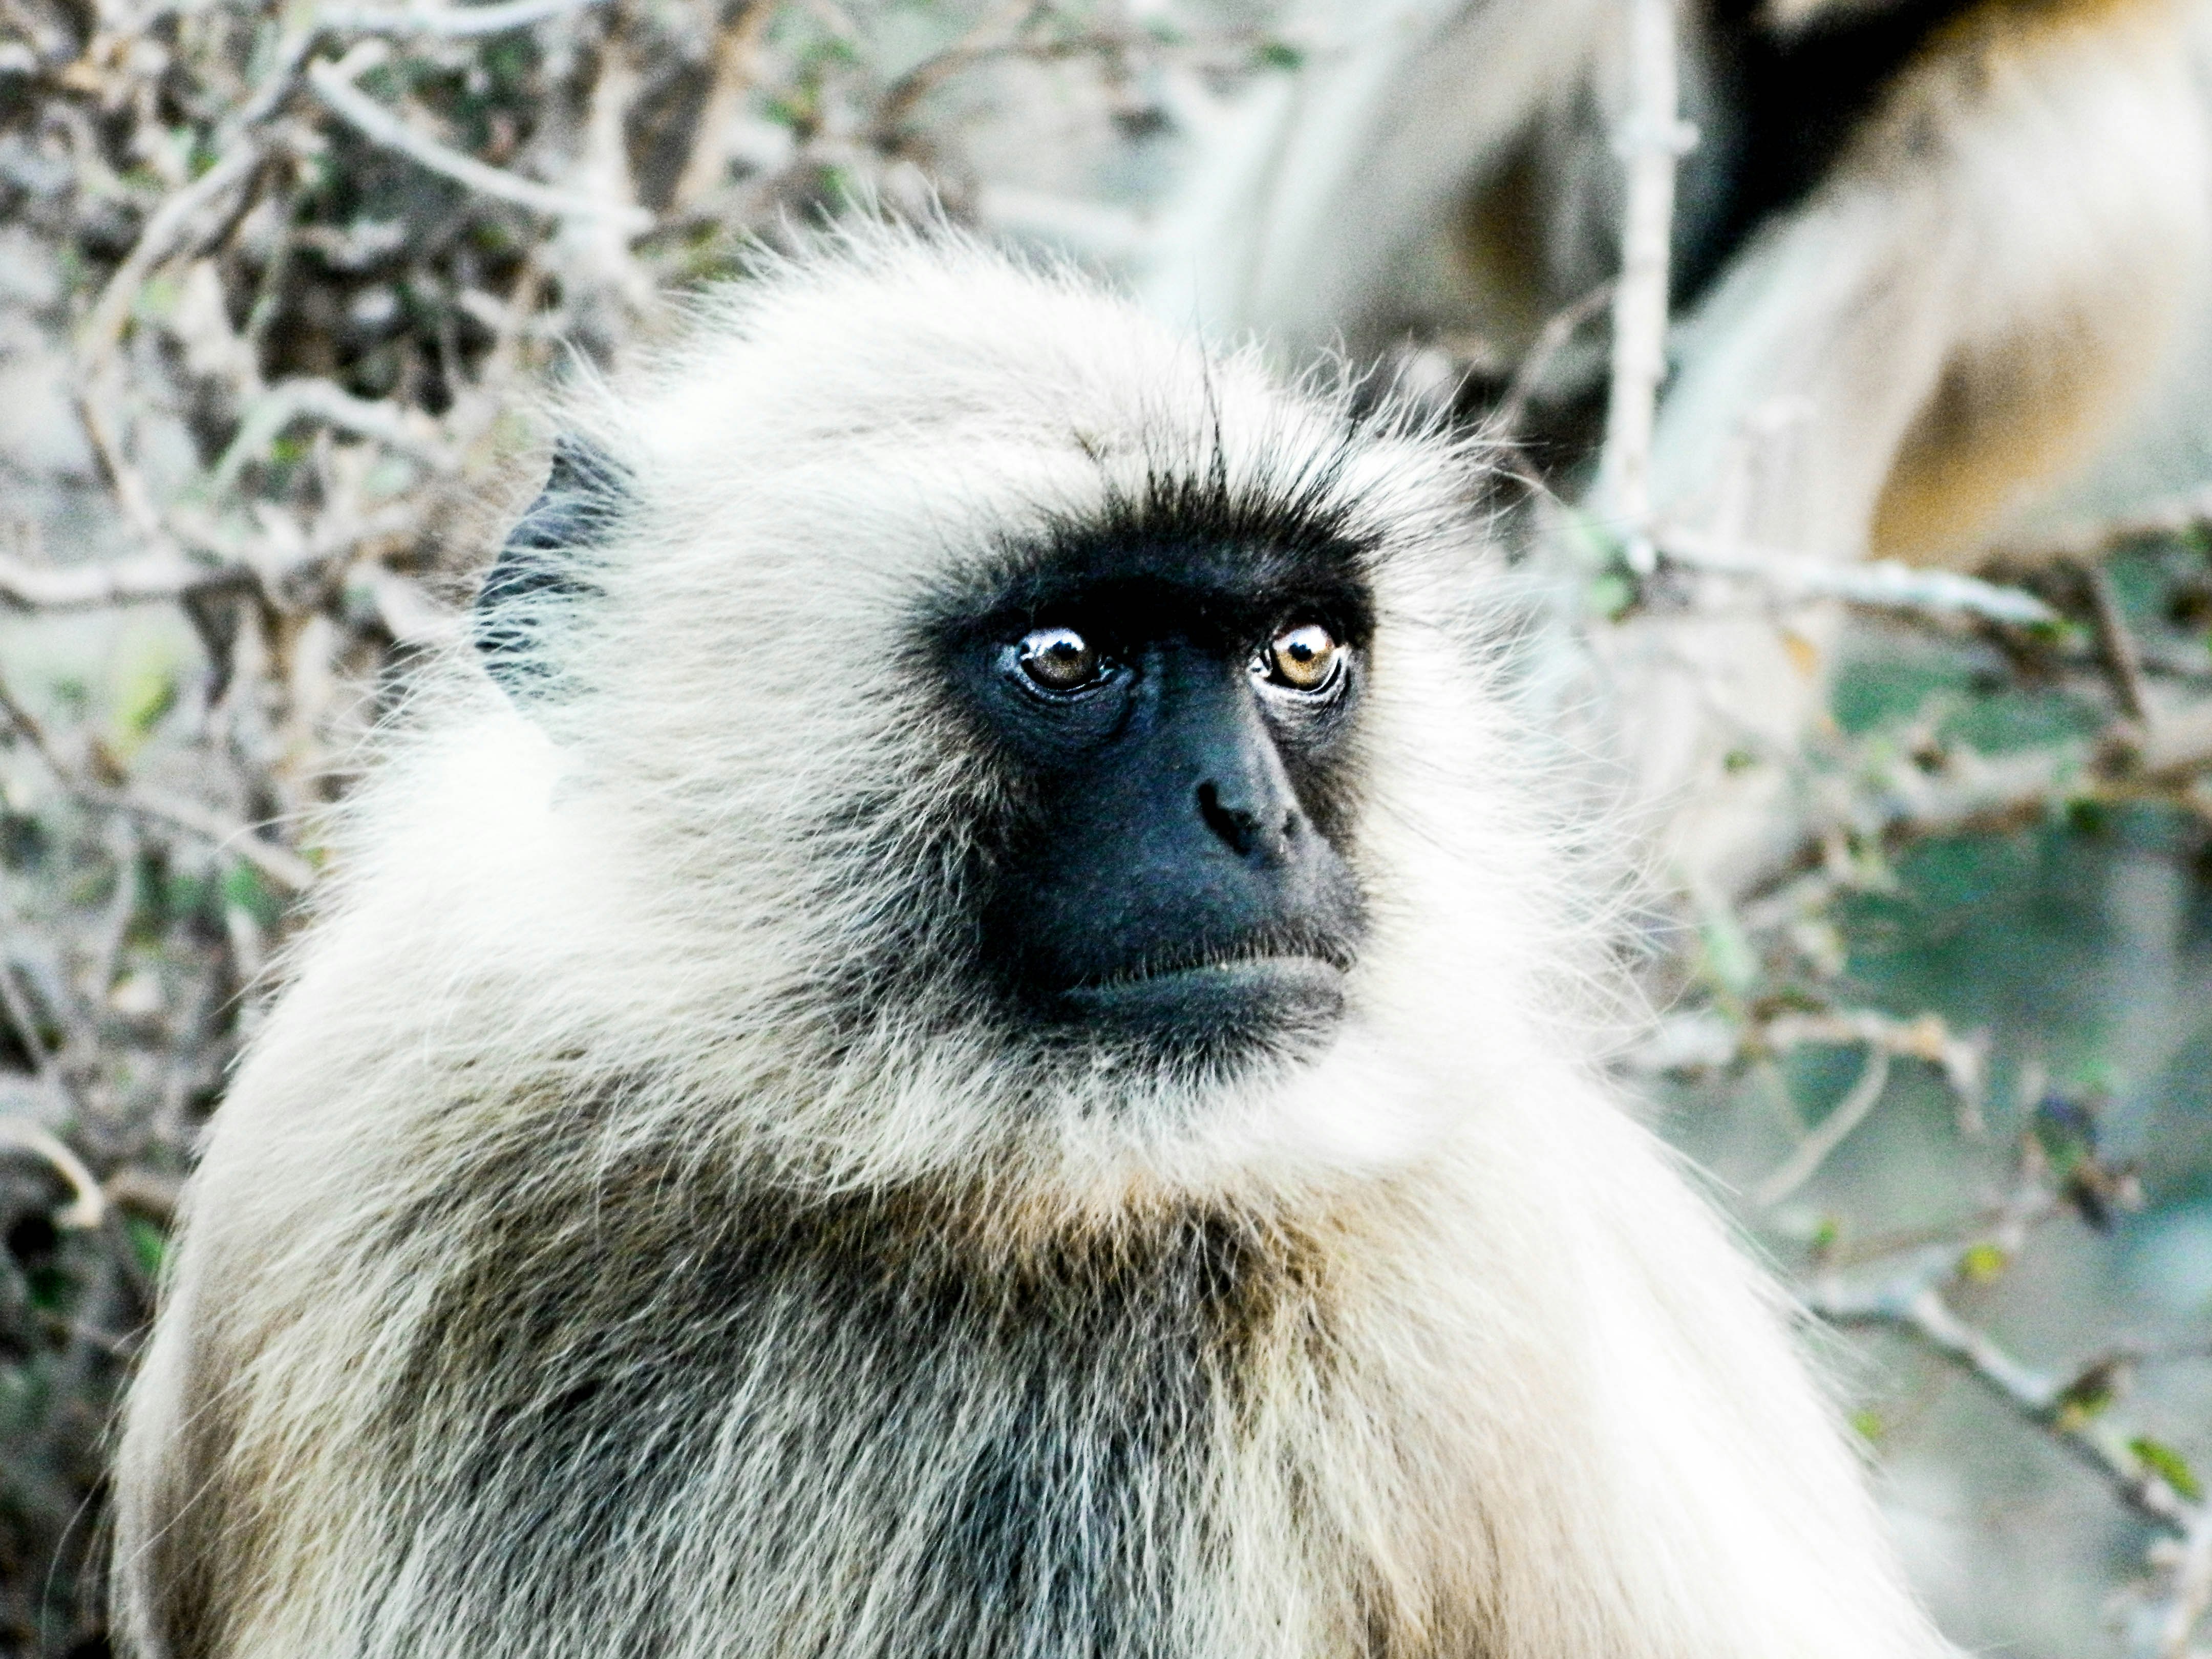 black faced monkey close-up photography